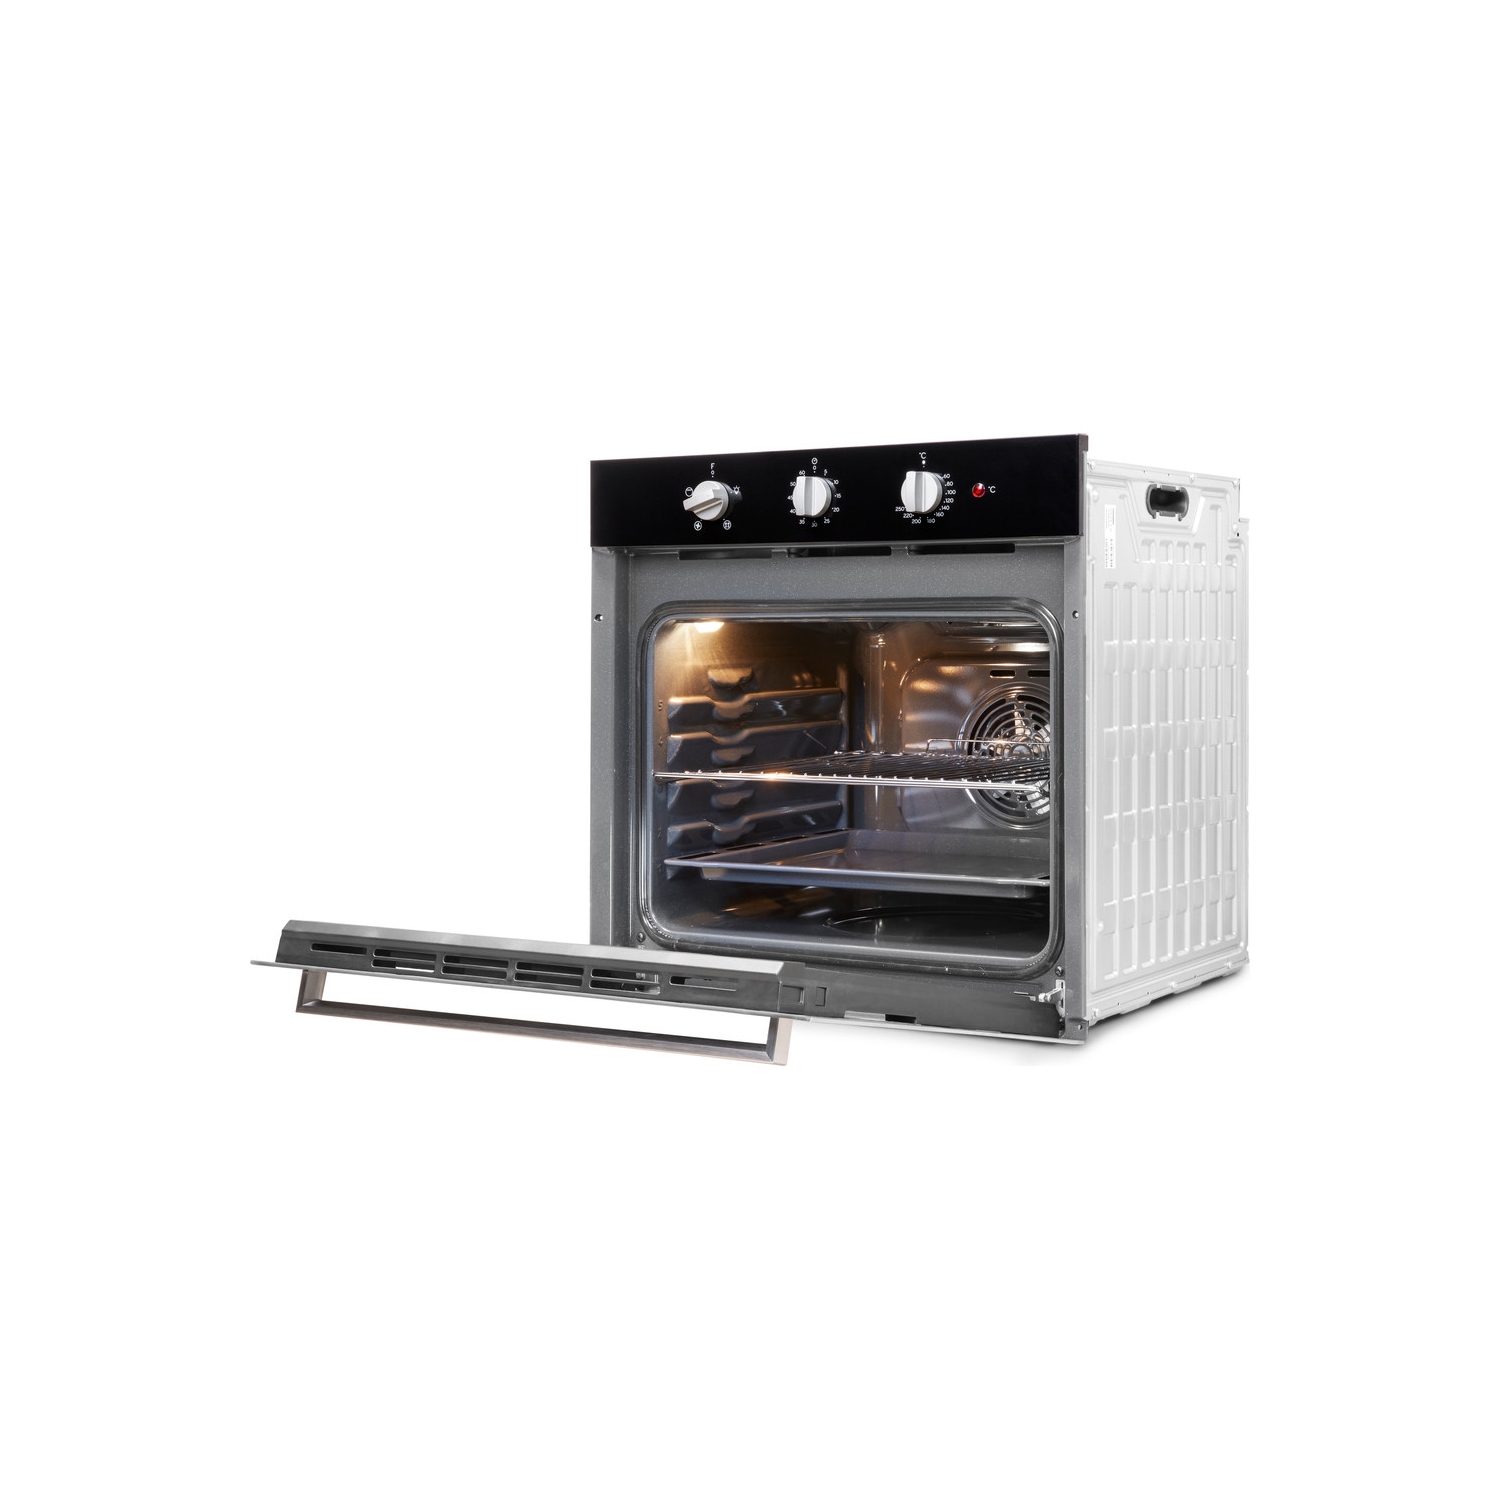 Indesit Built In Electric Single Oven - Black - A Rated - 2